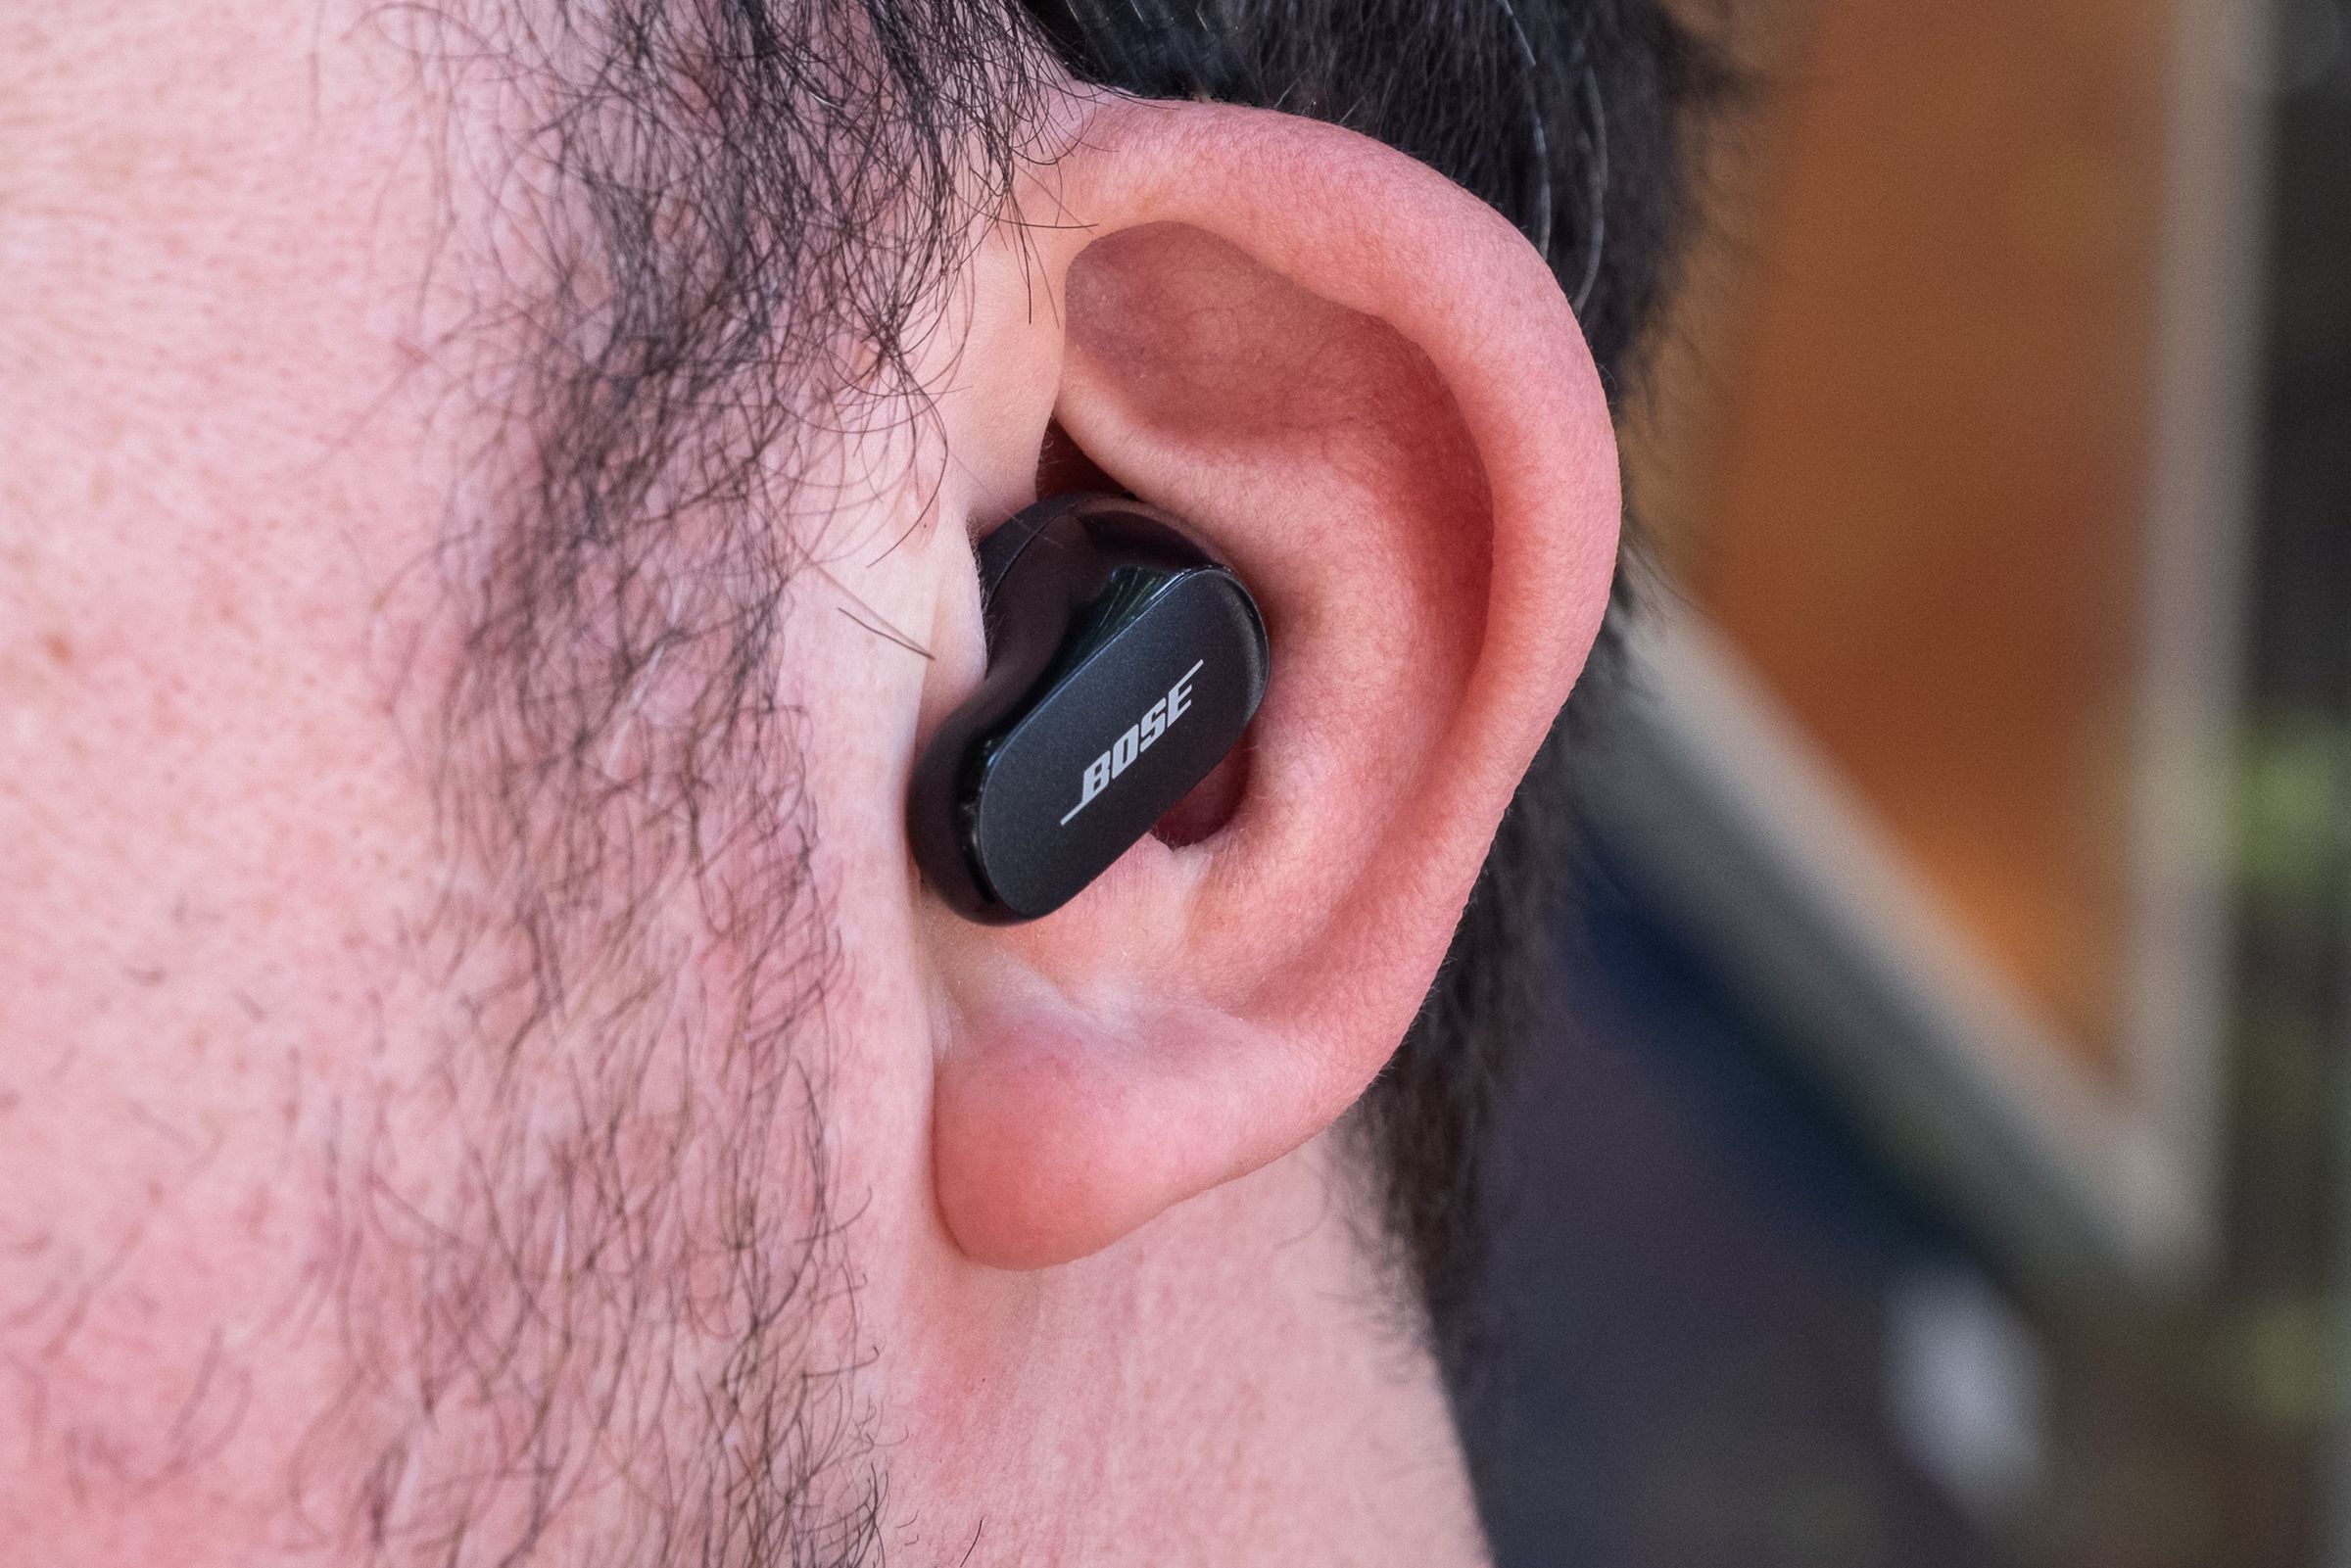 A close-up image of Bose’s QuietComfort Earbuds II in someone’s ears.